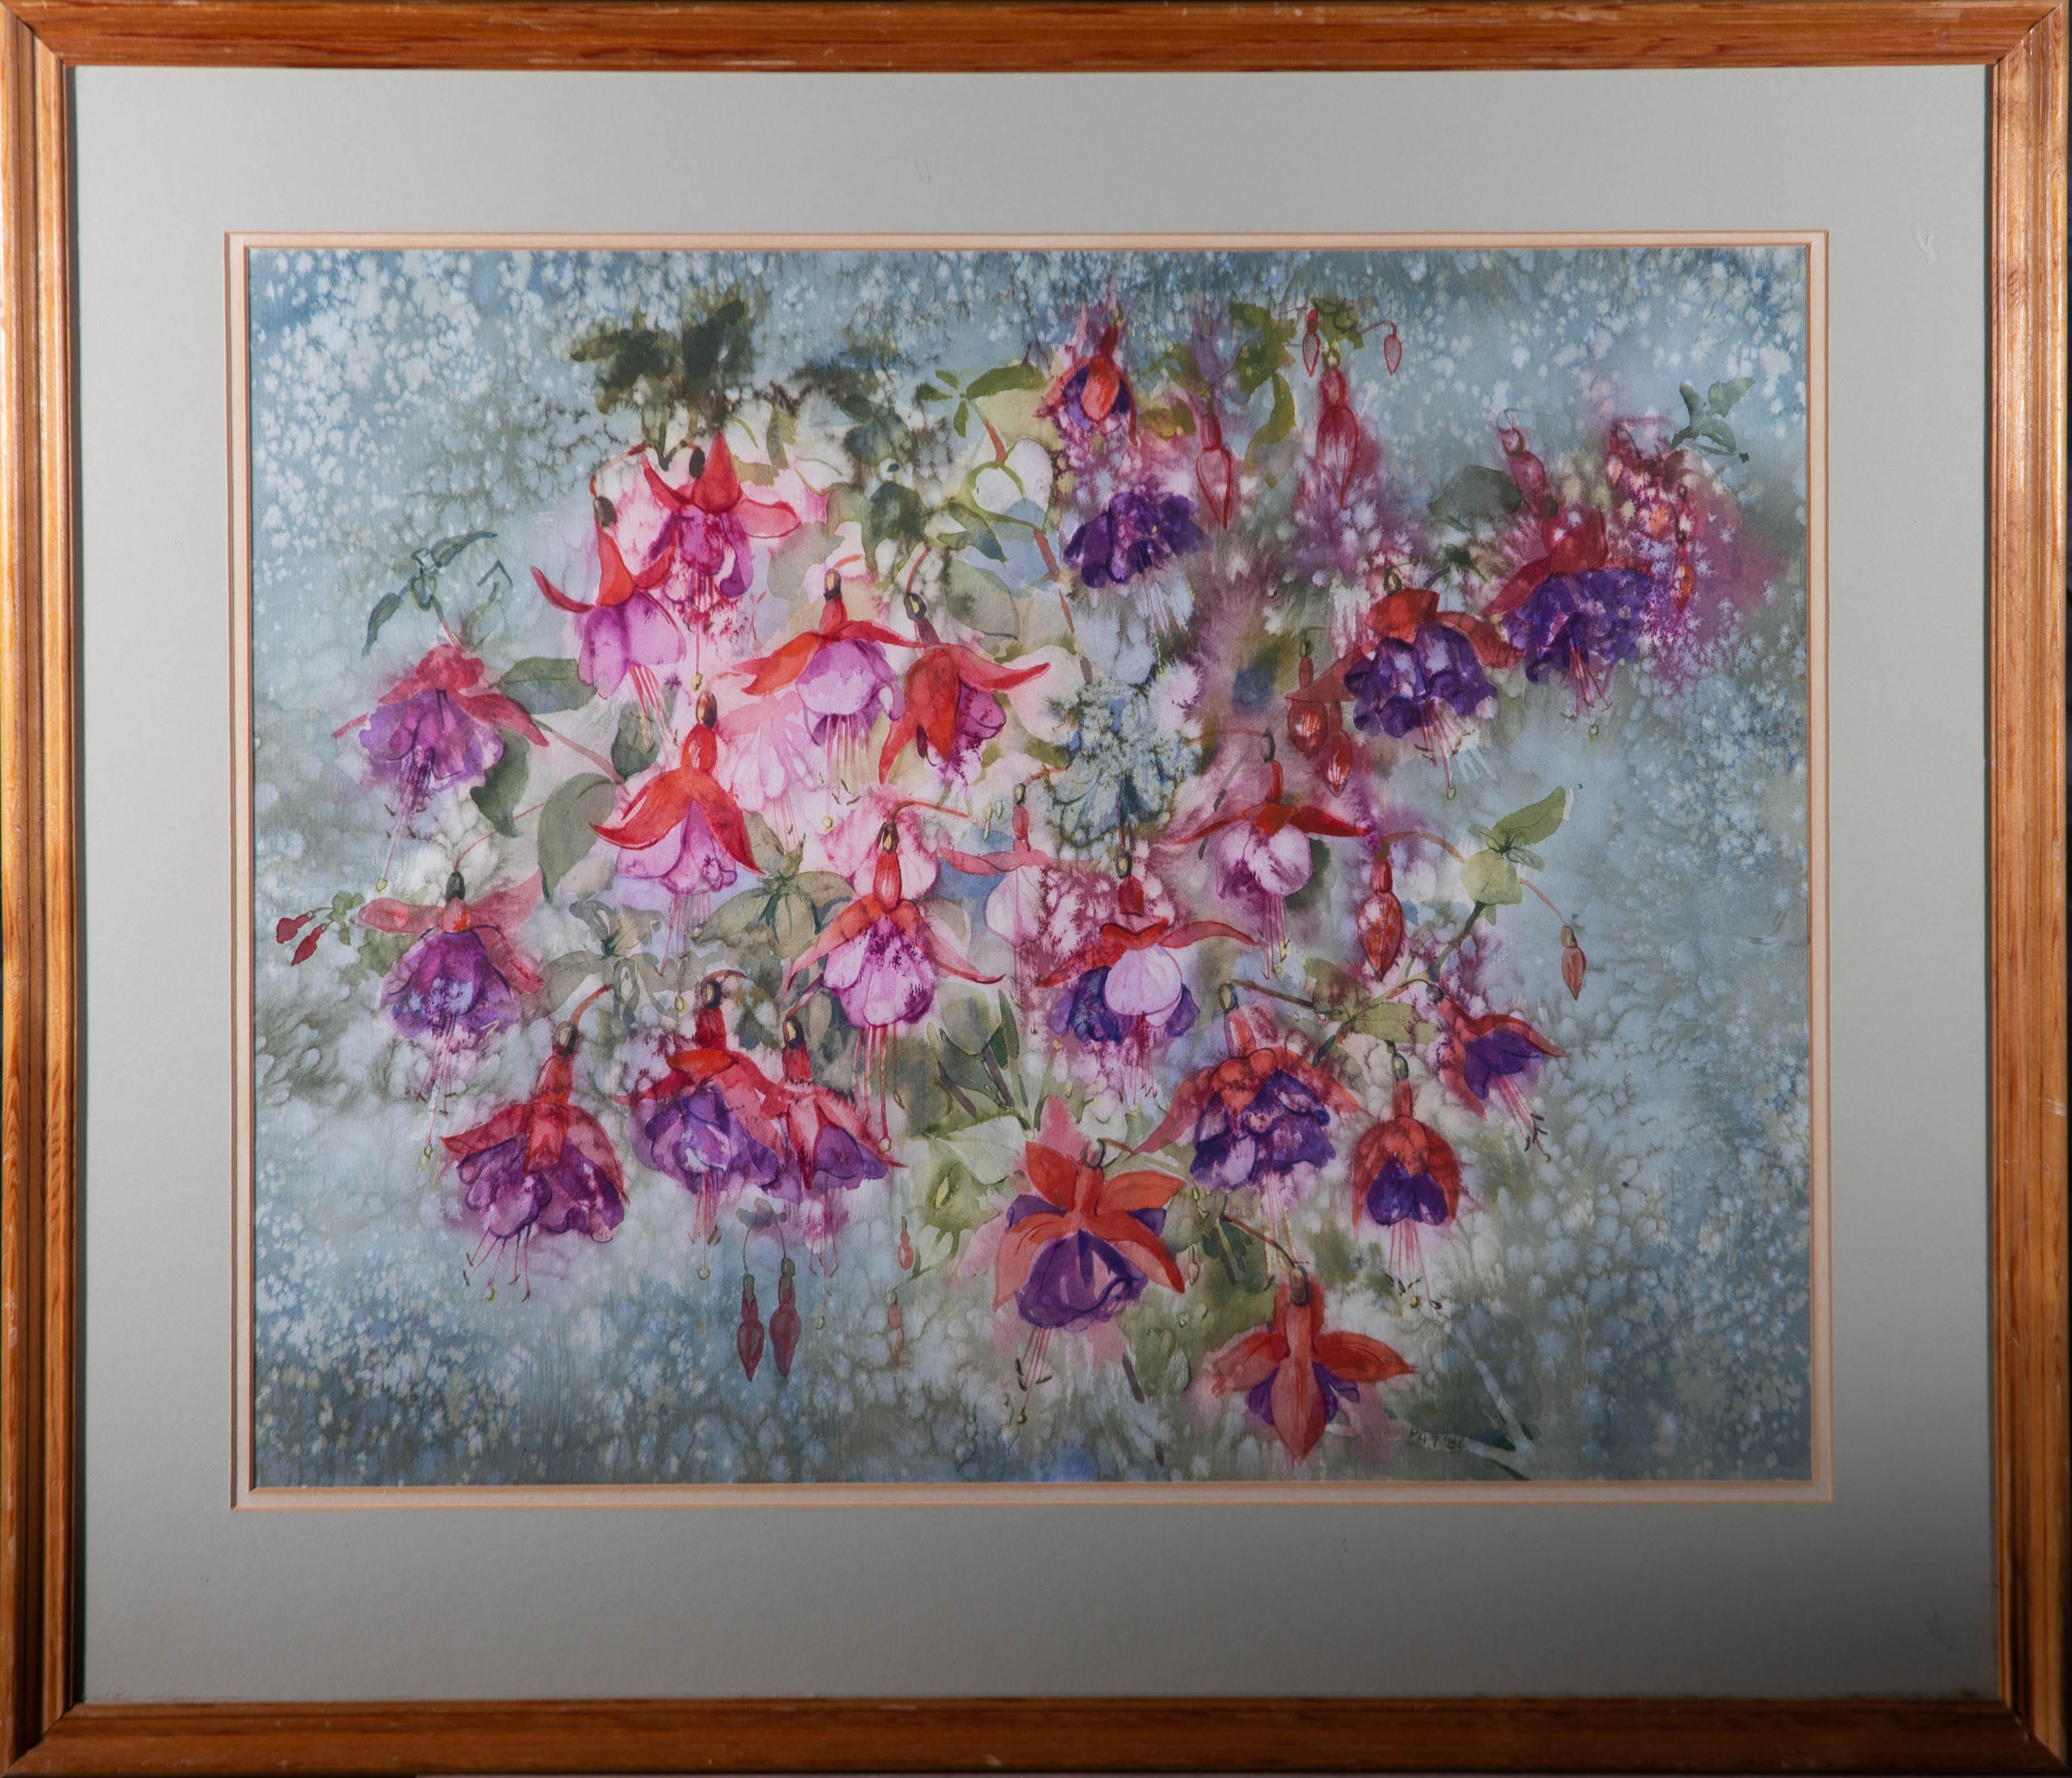 A charming watercolour painting by the British artist Patricia Howells, depicting a vibrant floral composition. Signed and dated to the lower right-hand corner. The artist's name is inscribed on the revere. There is a 'Workshop Gallery' exhibition